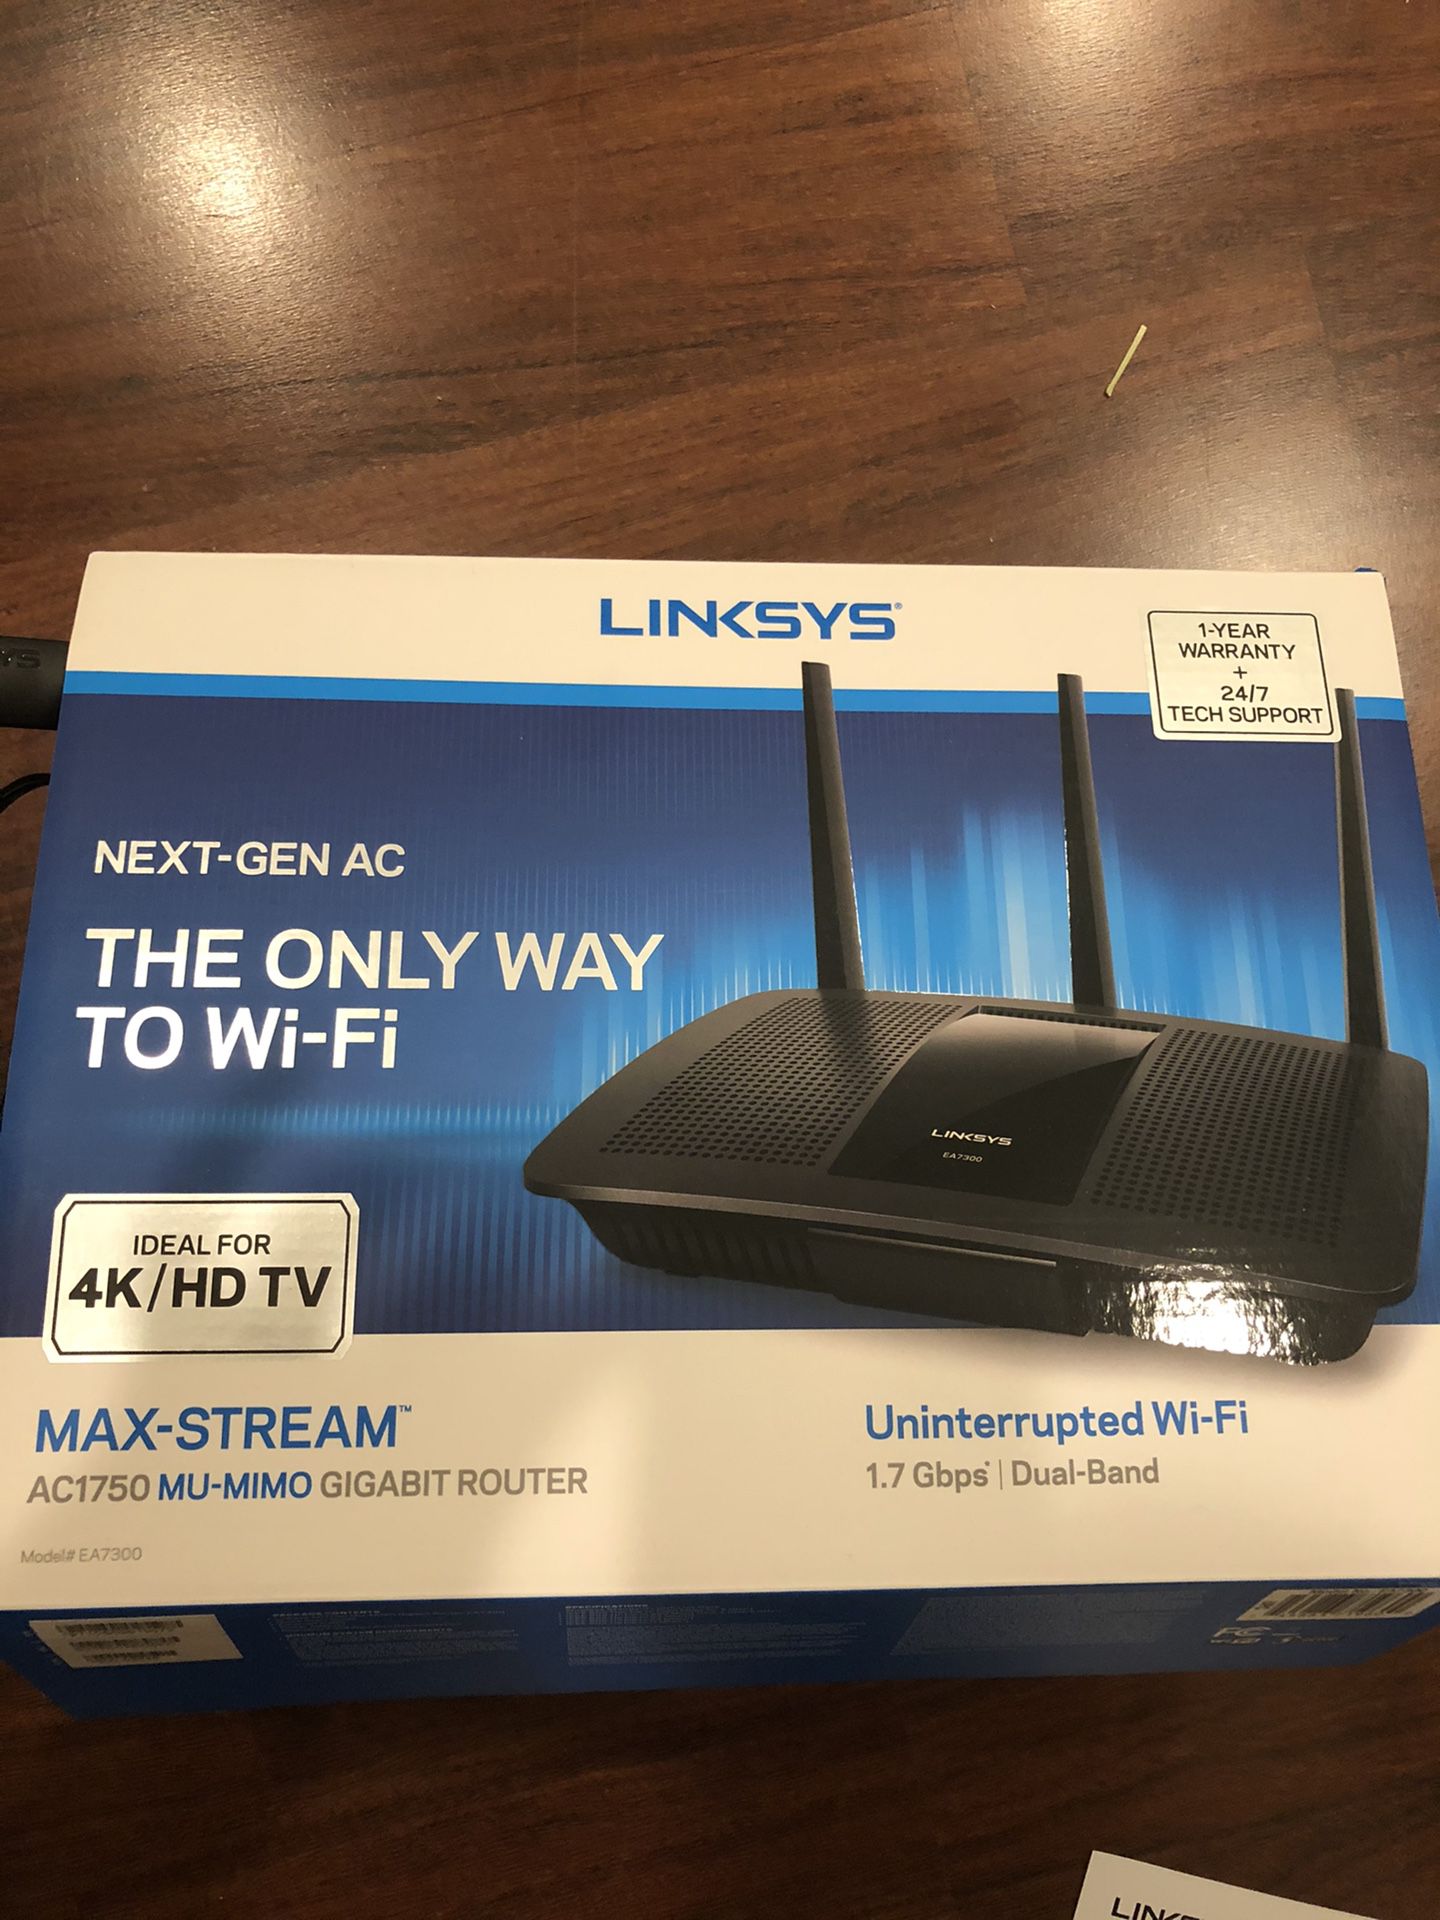 Linksys Max-Stream router